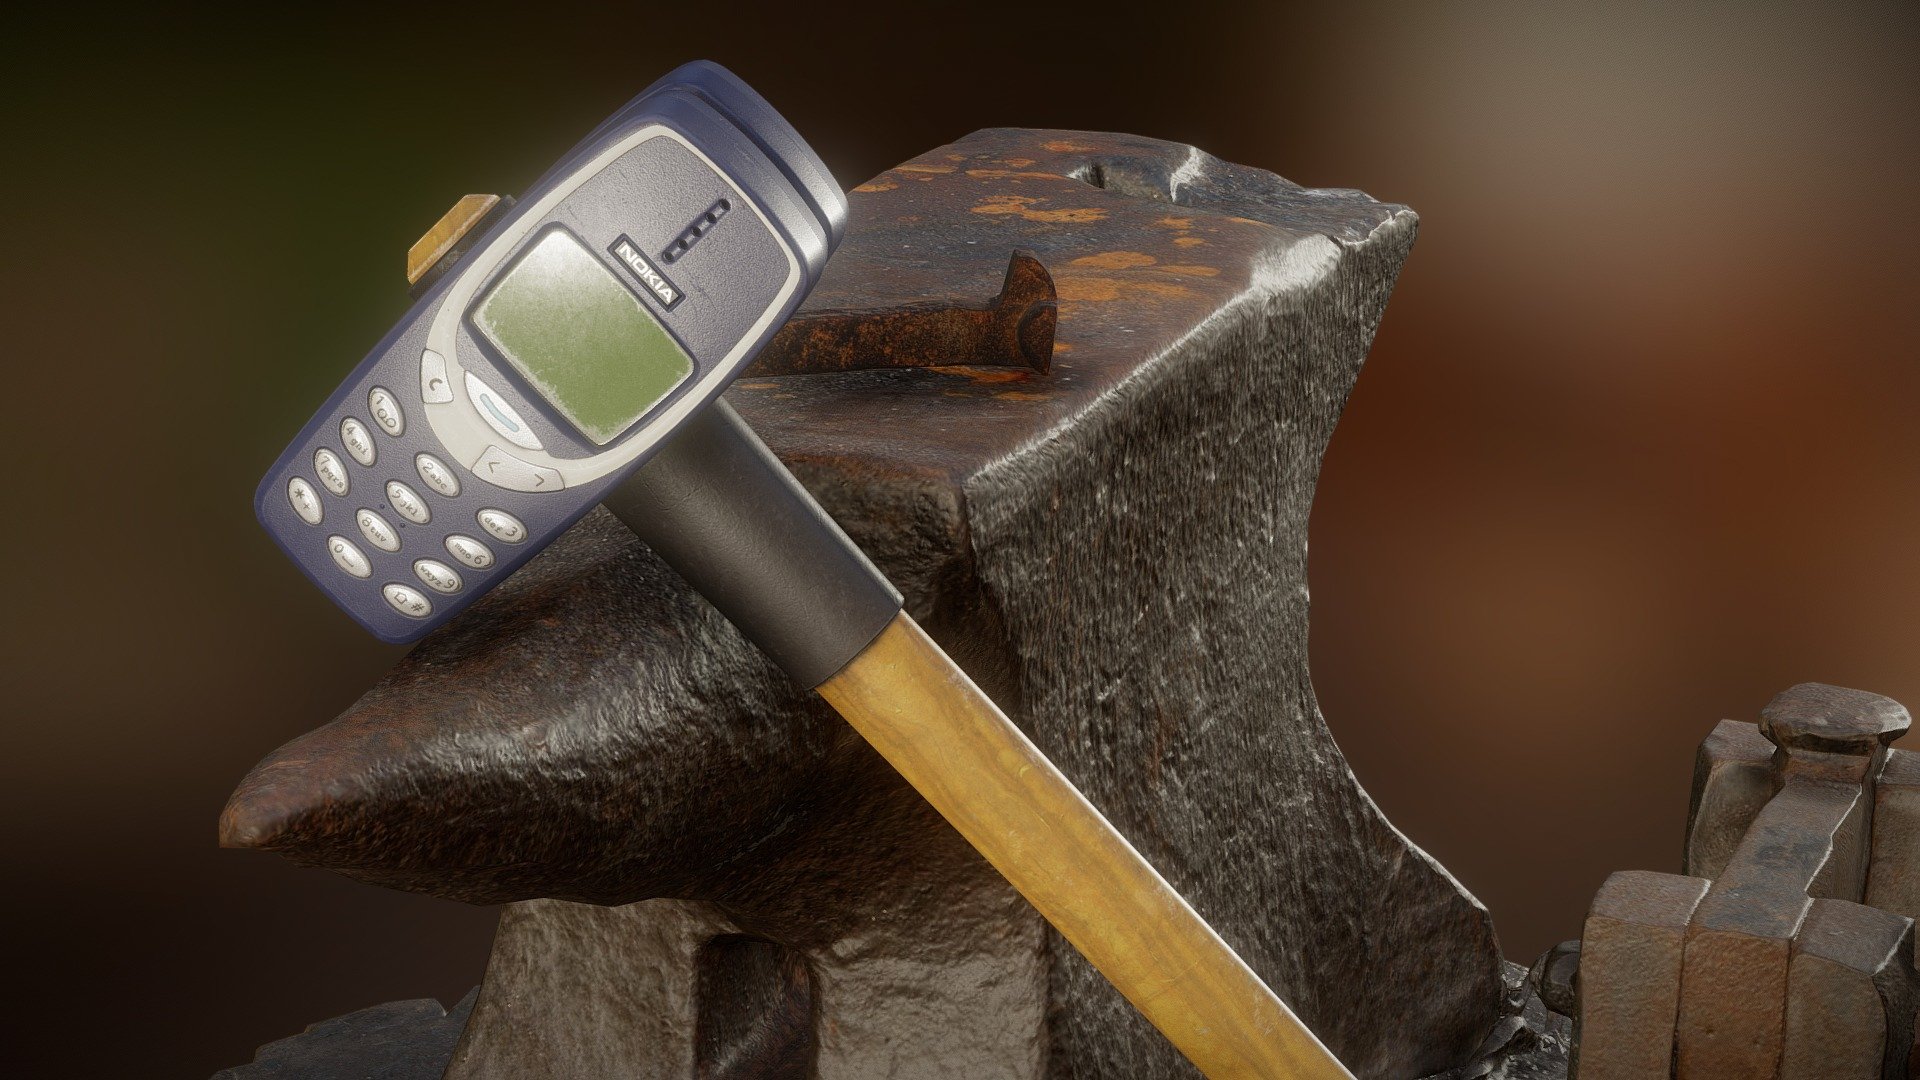 The sledgehammer that works hard, so you don't have to. Modeled with Blender and textured with Substance Painter 3d model